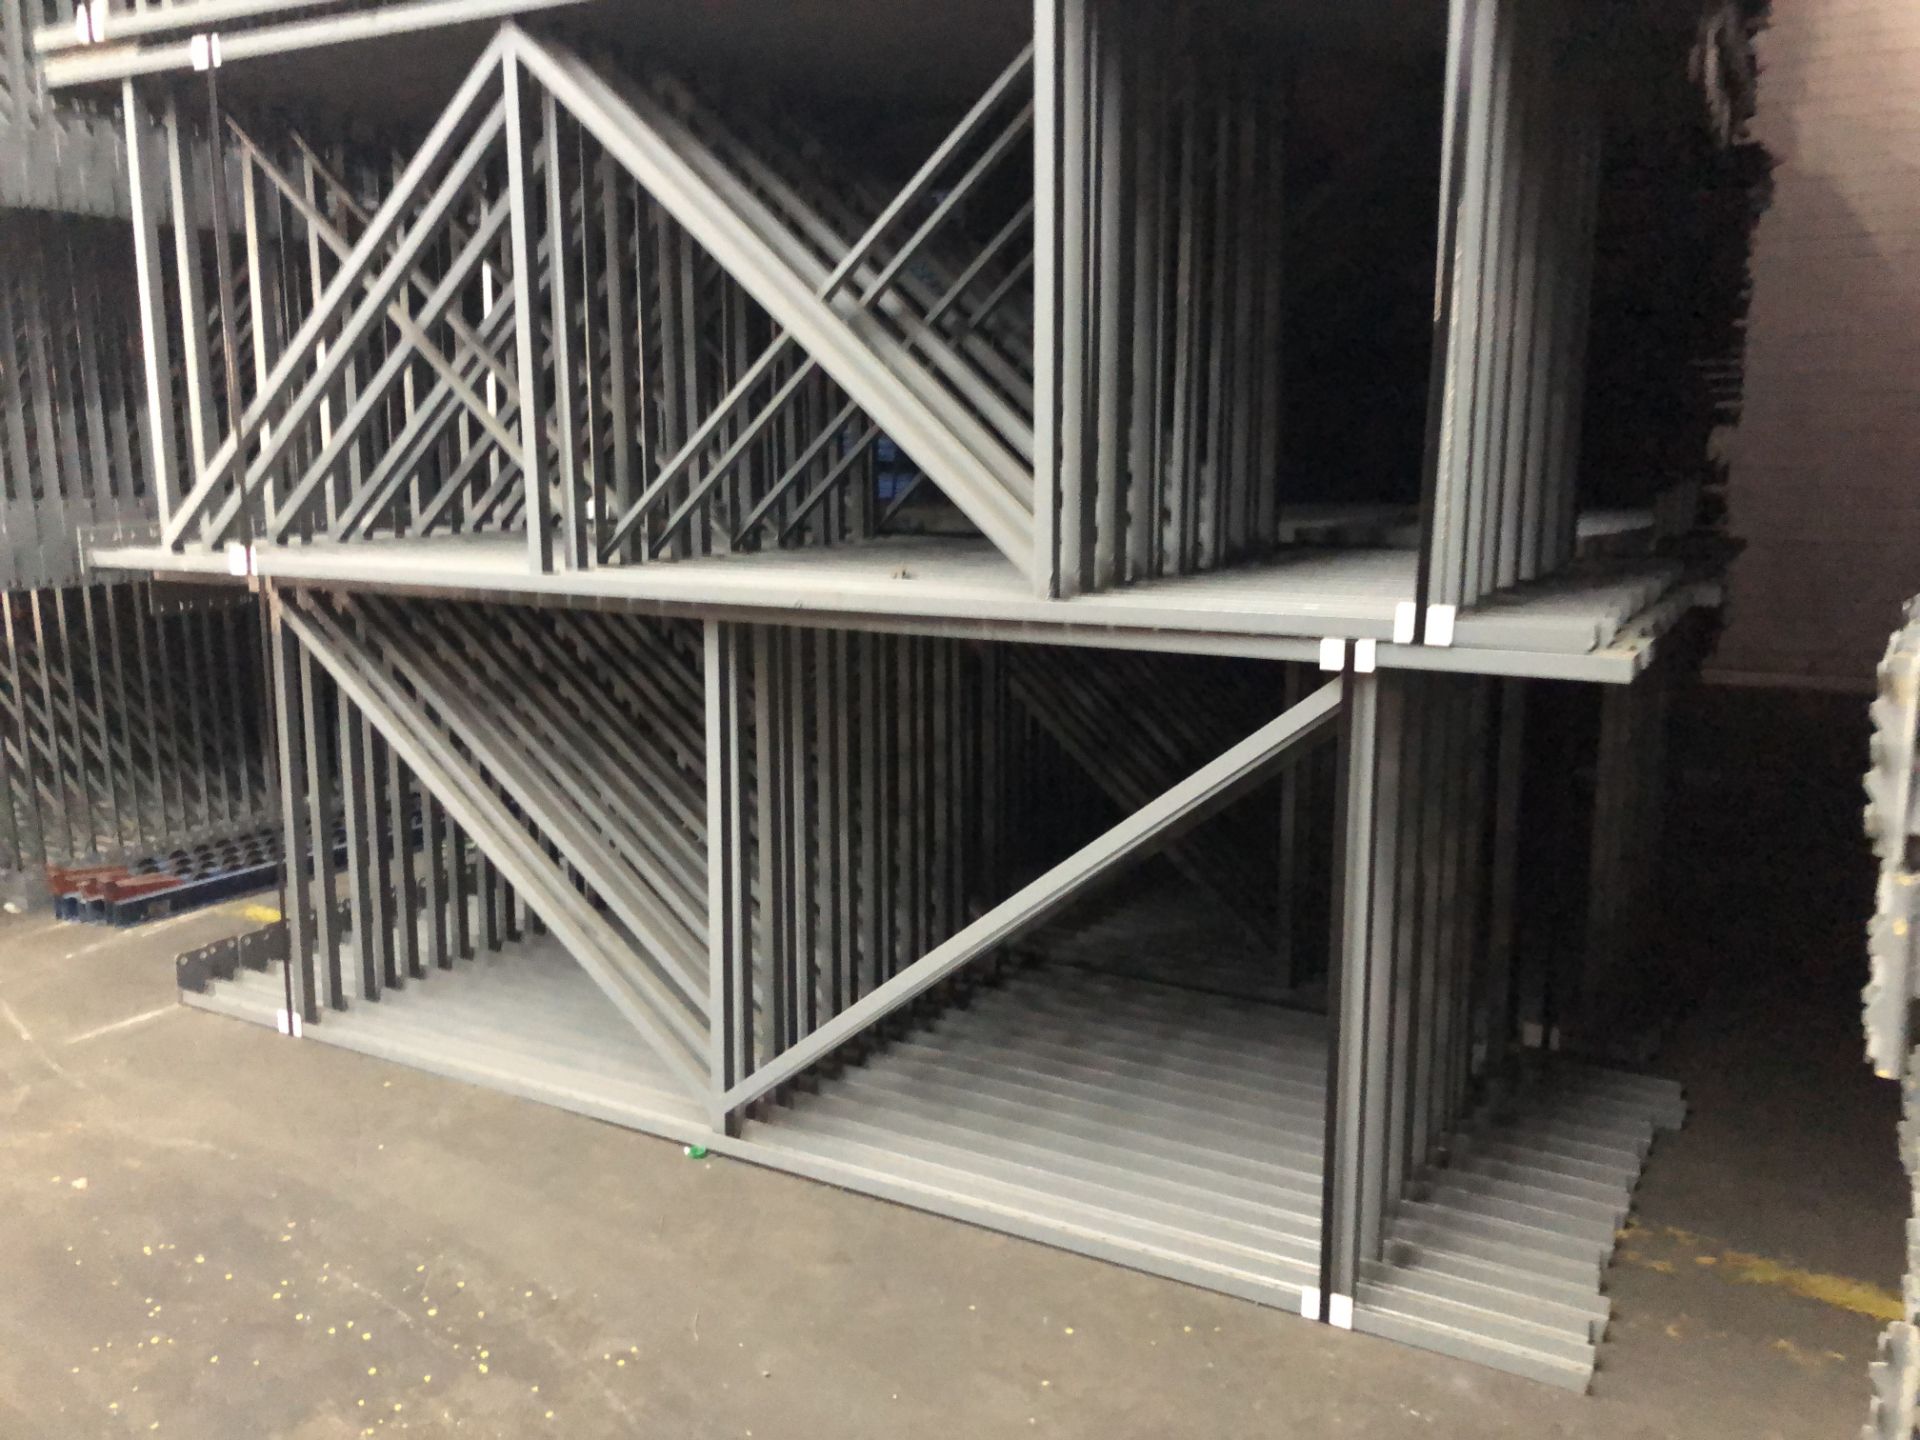 14 BAYS OF 10.5'H X 42"D X 102"L STRUCTURAL STYLE PALLET RACKS - Image 3 of 6